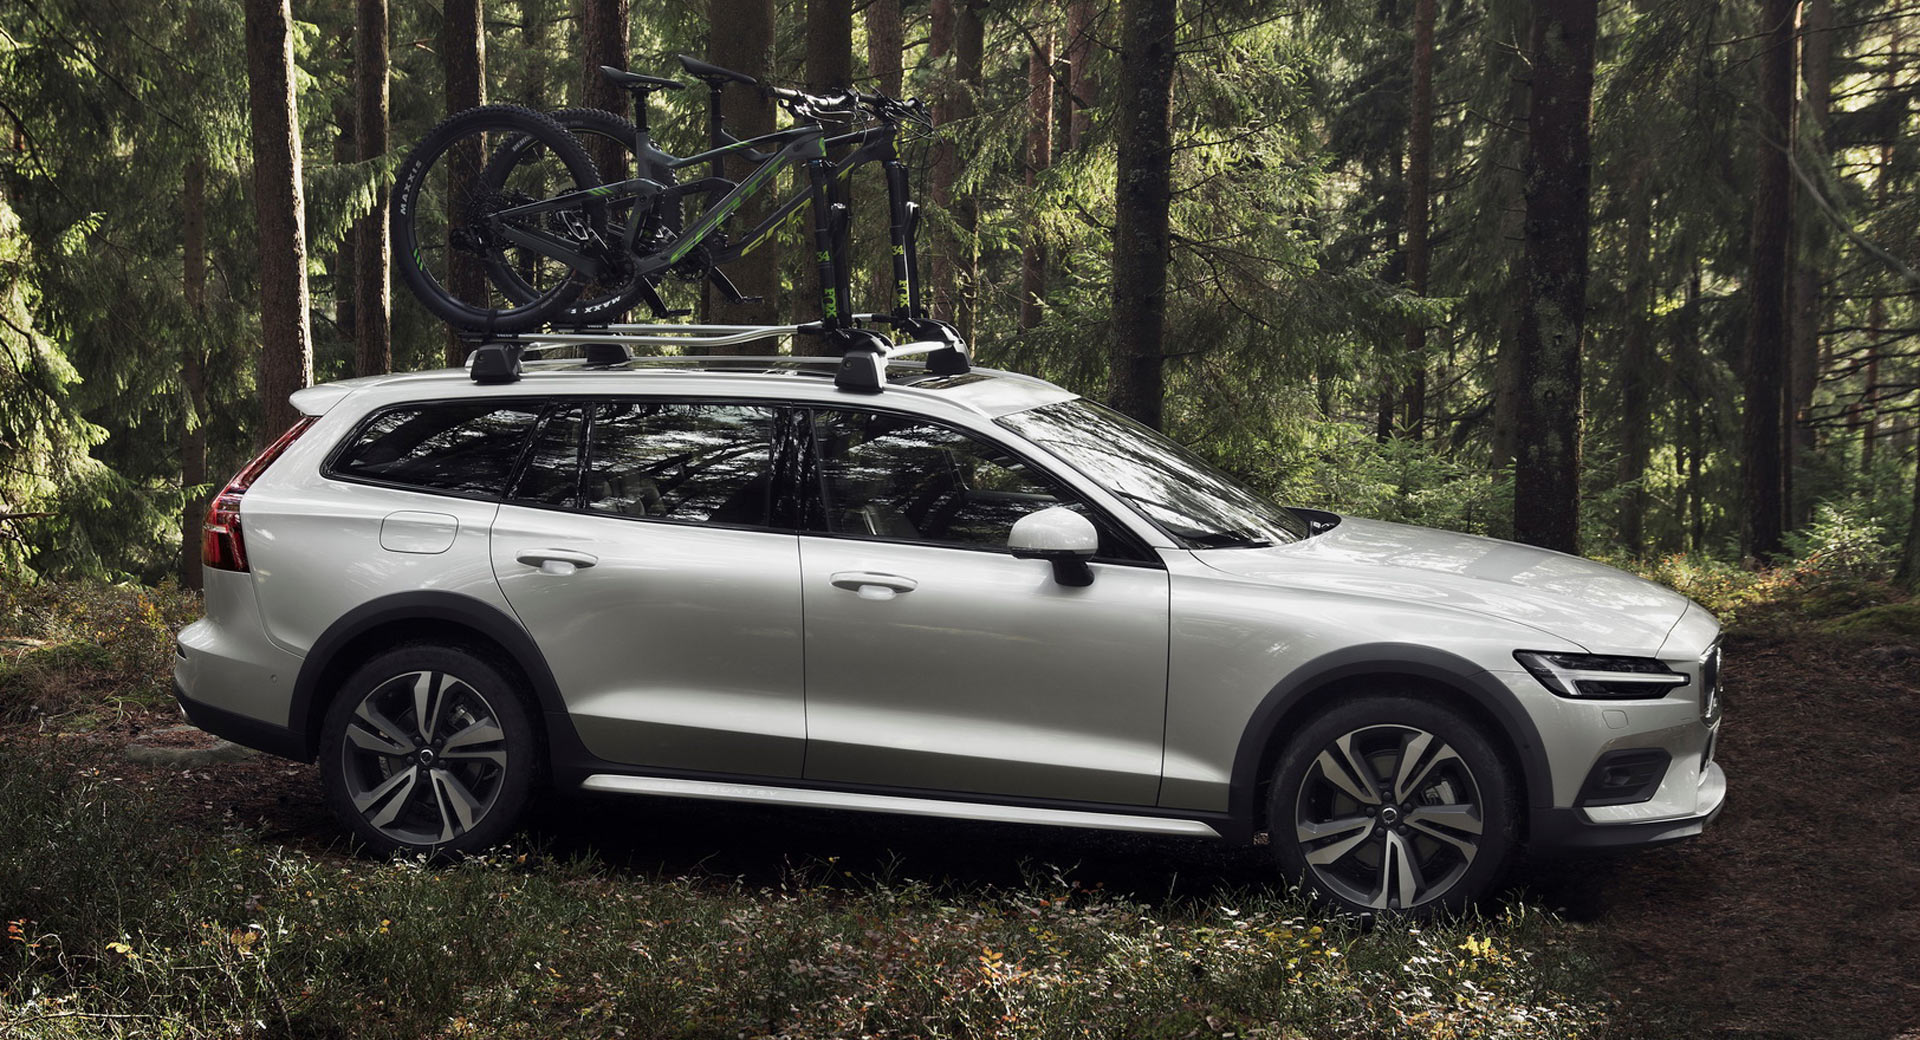 Volvo Prices 2020 Volvo V60 Cross Country From $46,095 In The U.S. |  Carscoops